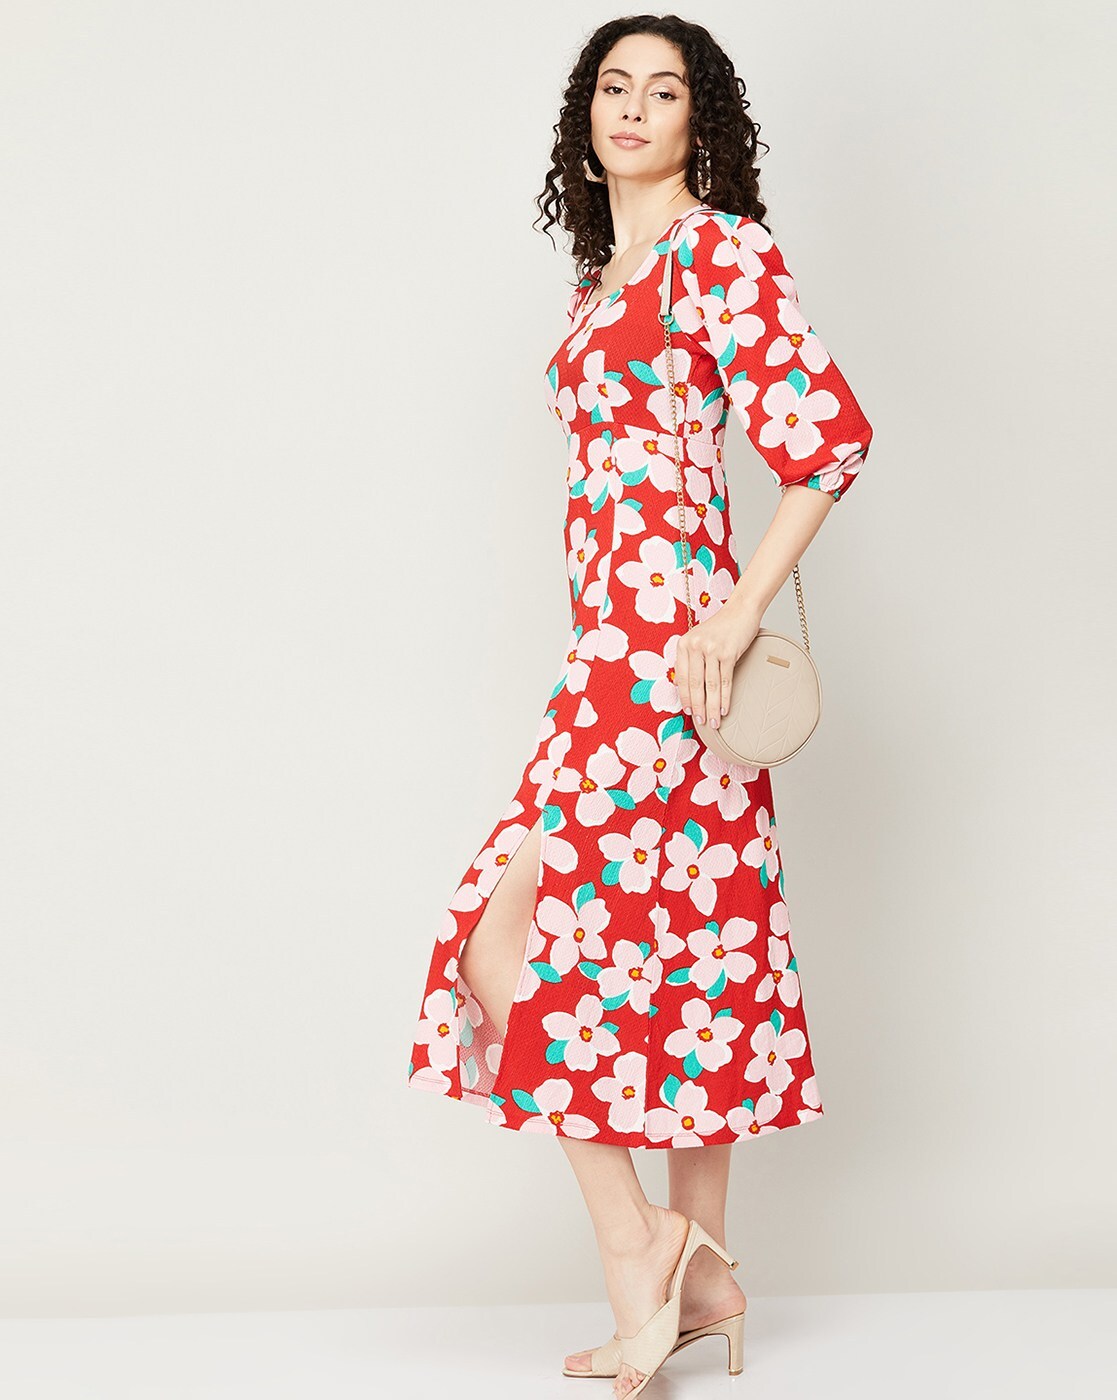 White and red floral dress by The Weave Story | The Secret Label